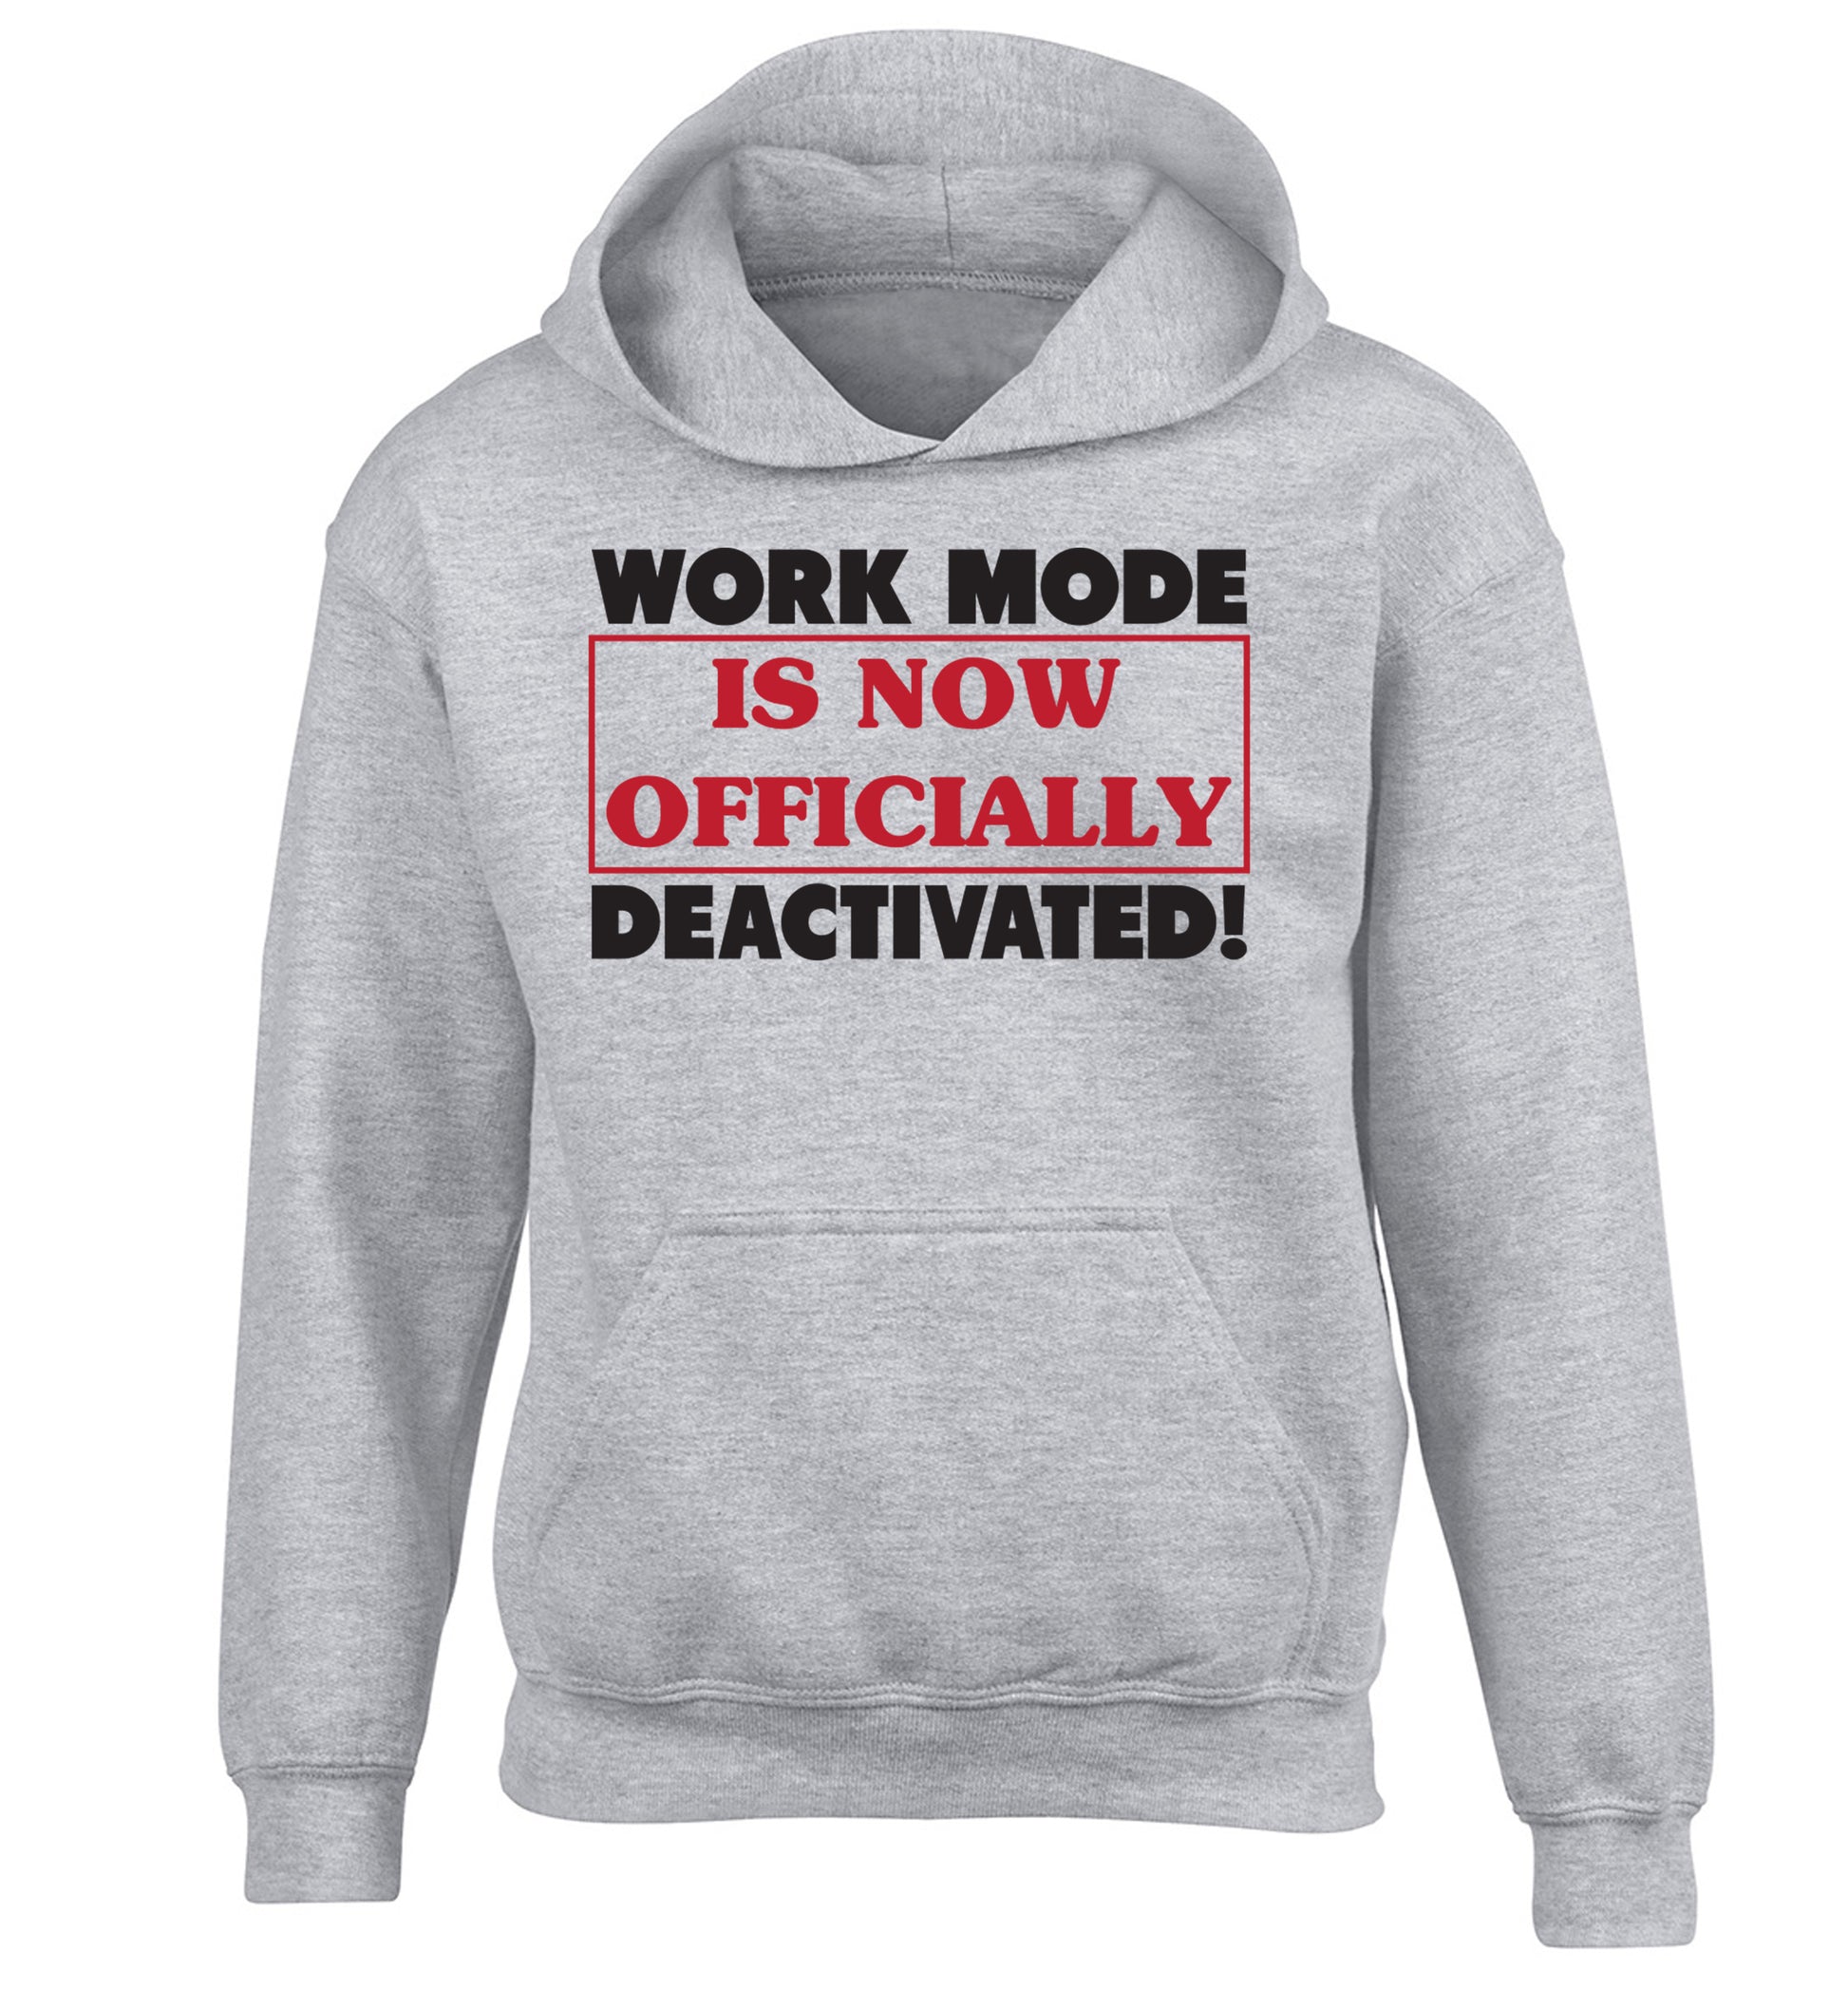 Work mode is now officially deactivated children's grey hoodie 12-13 Years